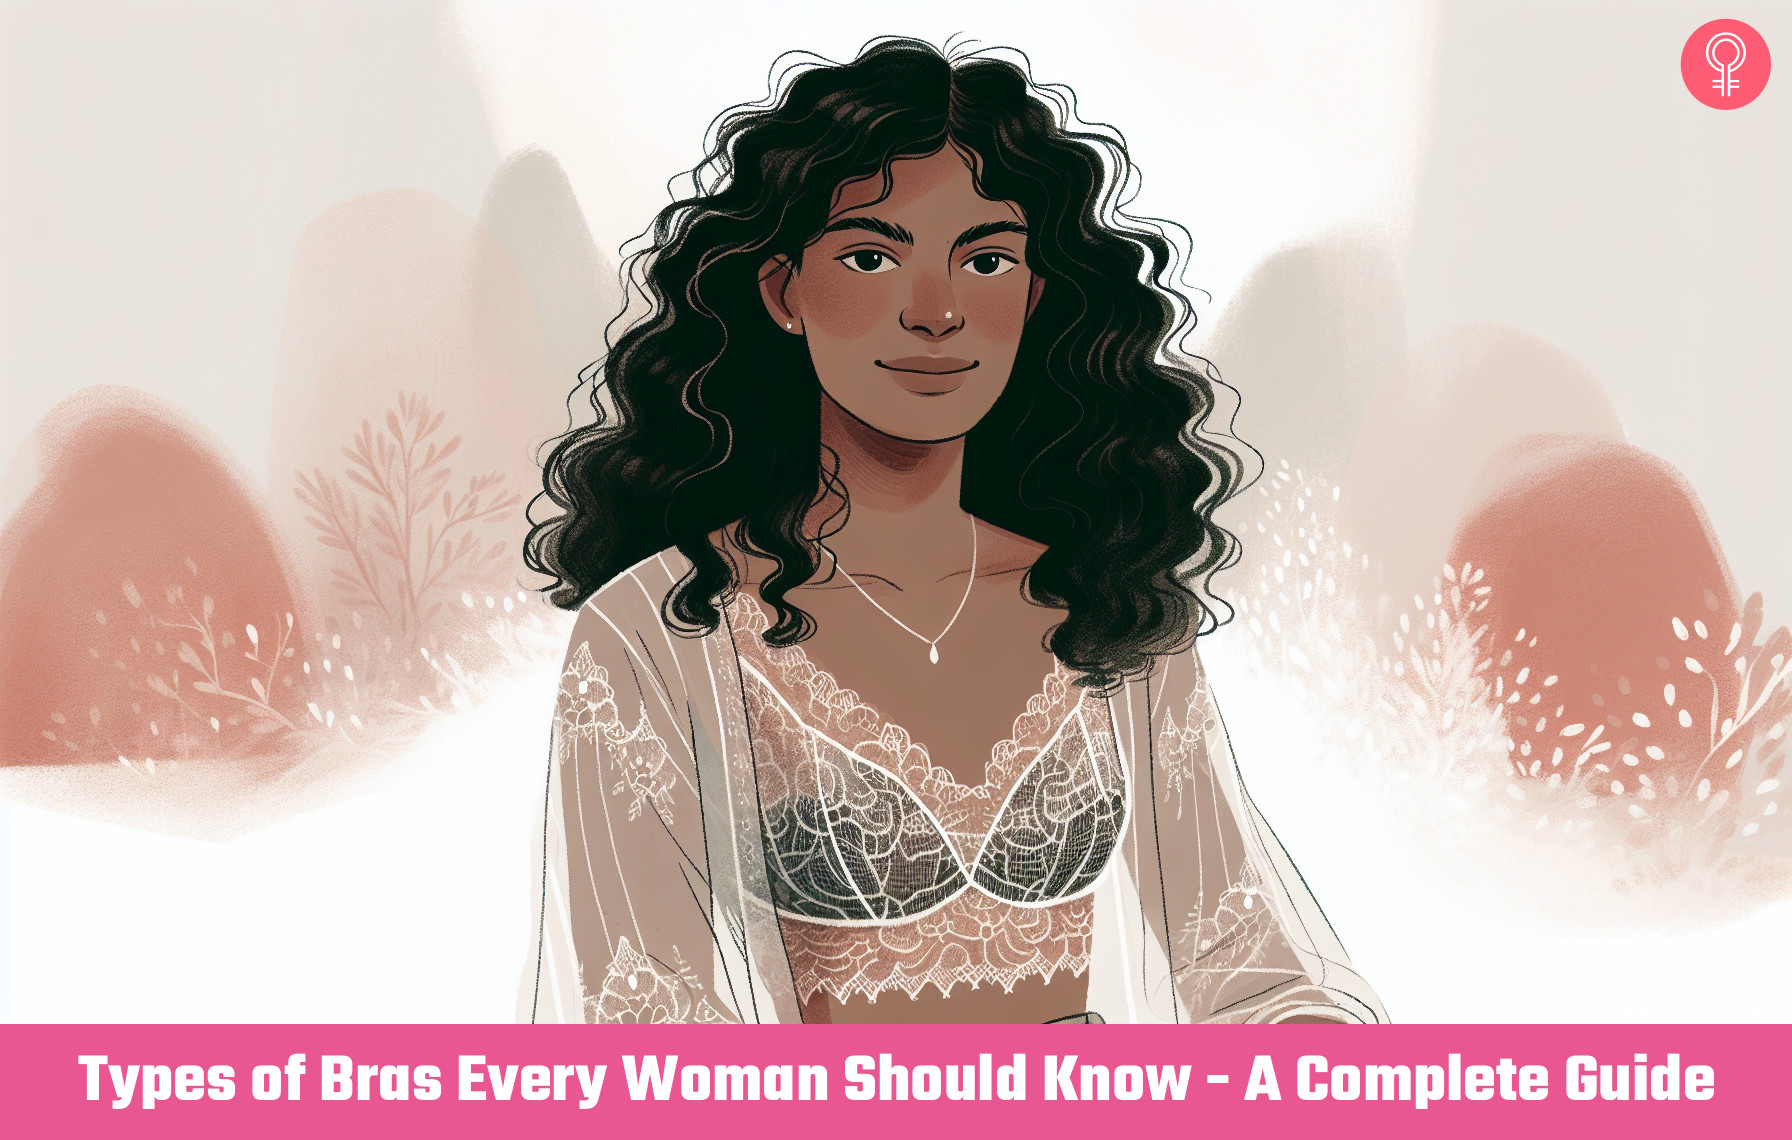 30 Types of Bras Every Woman Should Know: Our anatomy might be the